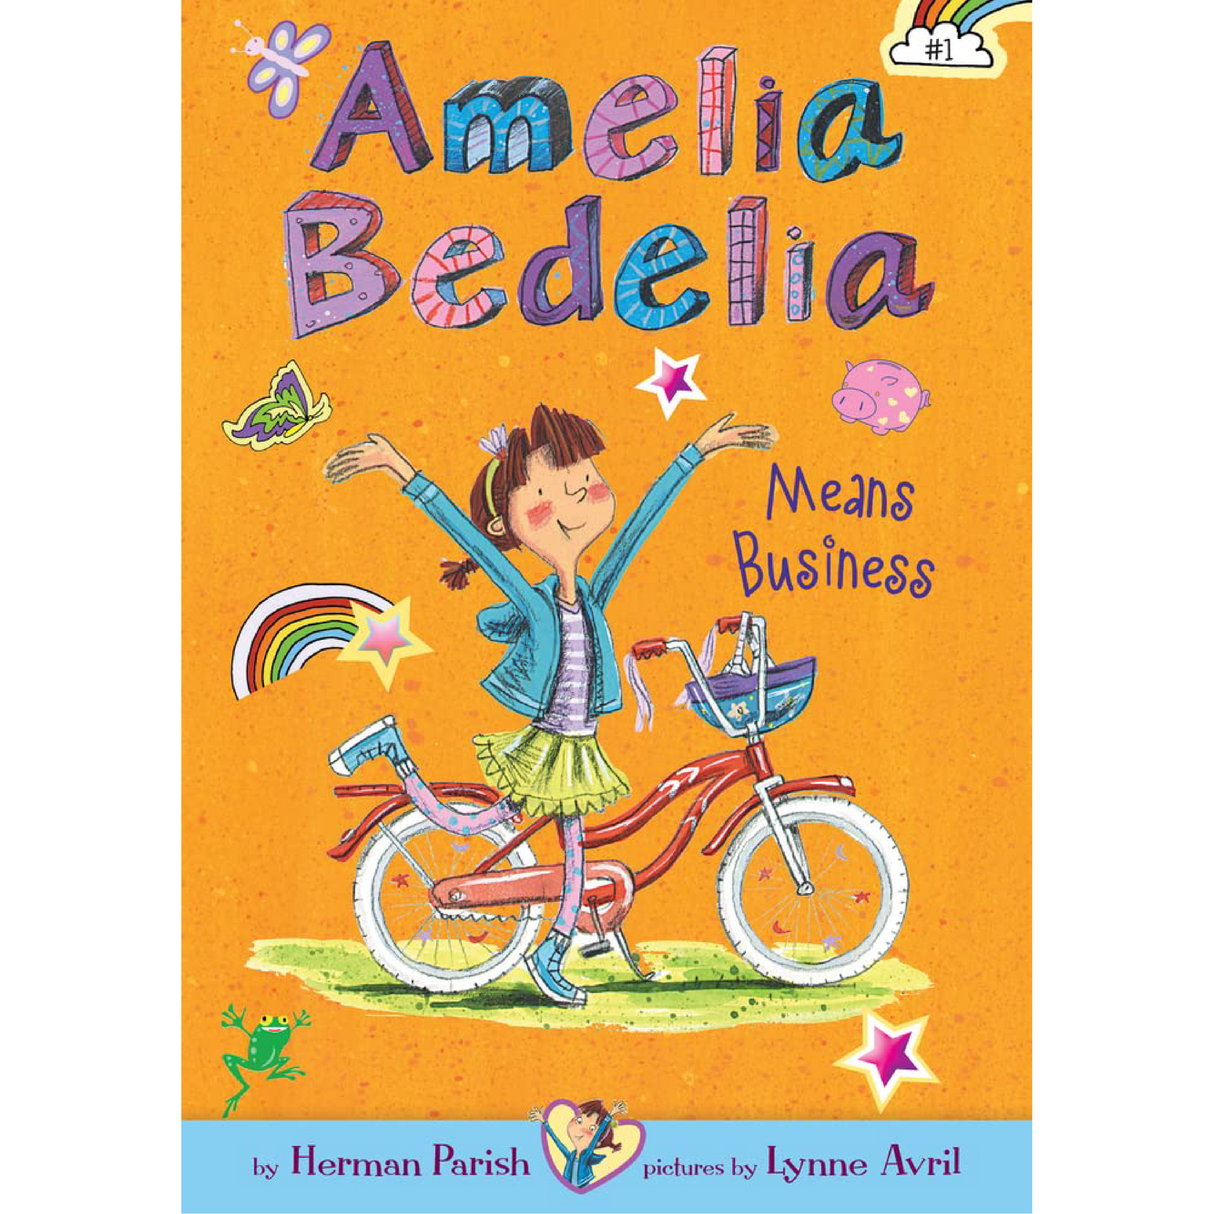 A Second Chance - Amelia Bedelia Means Business Book - Delivery All Over Lebanon